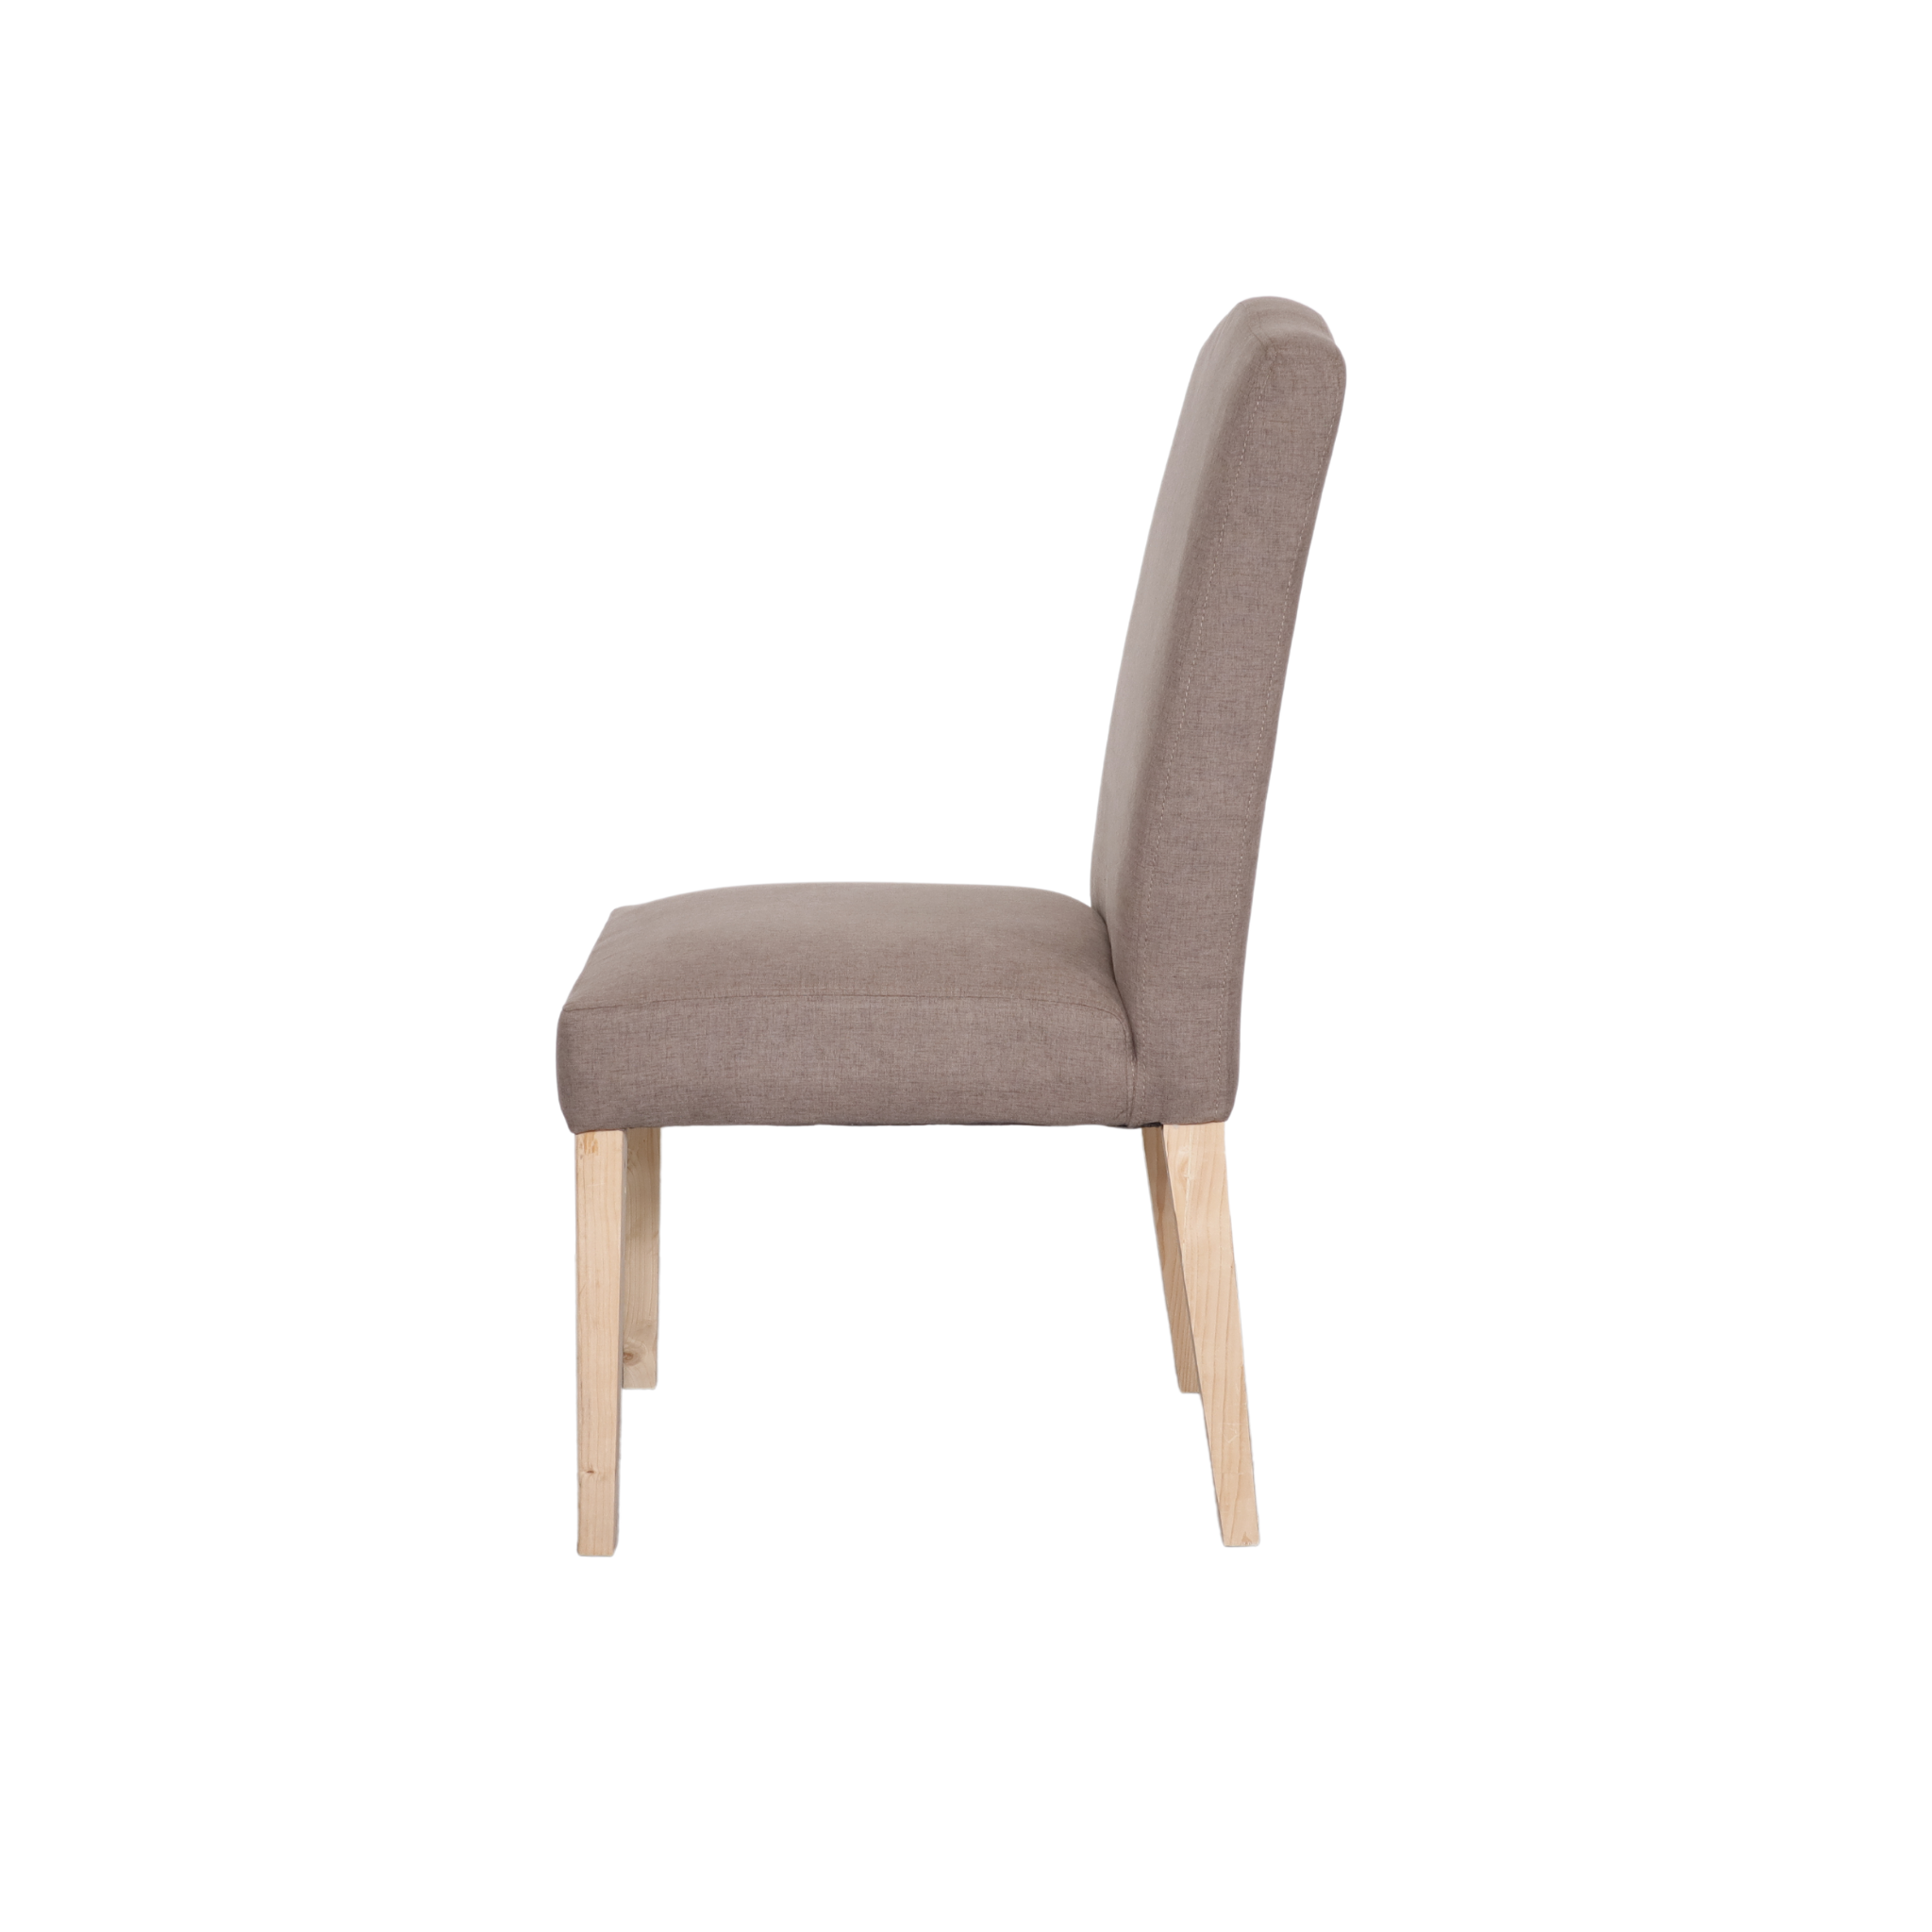 TERRY Solid Wood Dining Chair AF Home